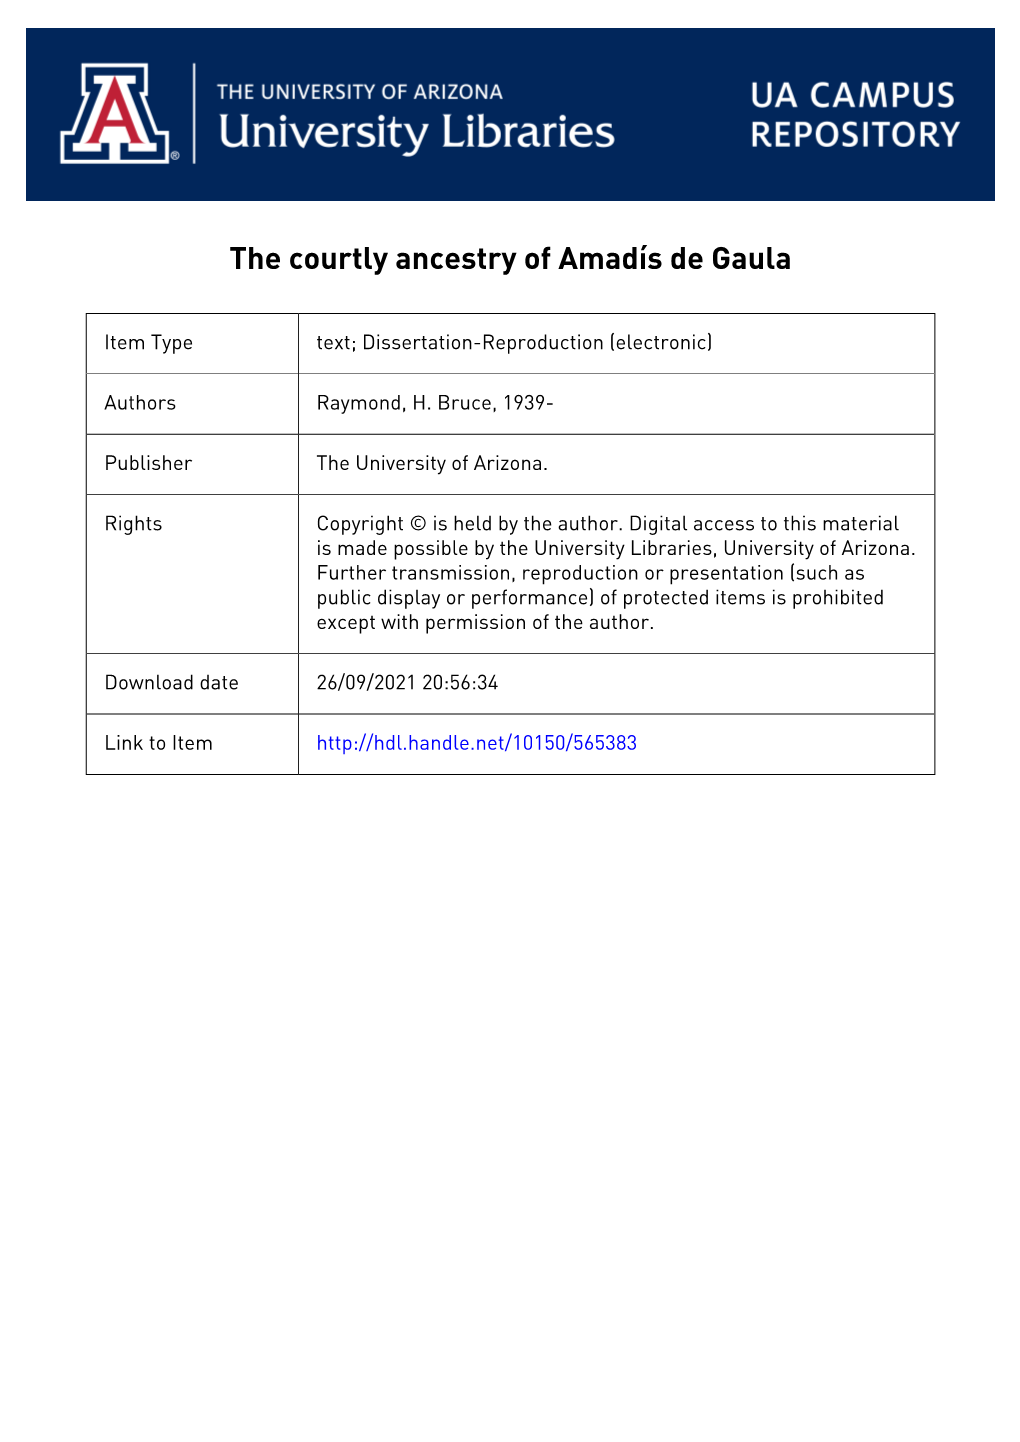 THE COURTLY ANCESTRY of AMADIS DE GAULA by H„ Bruce